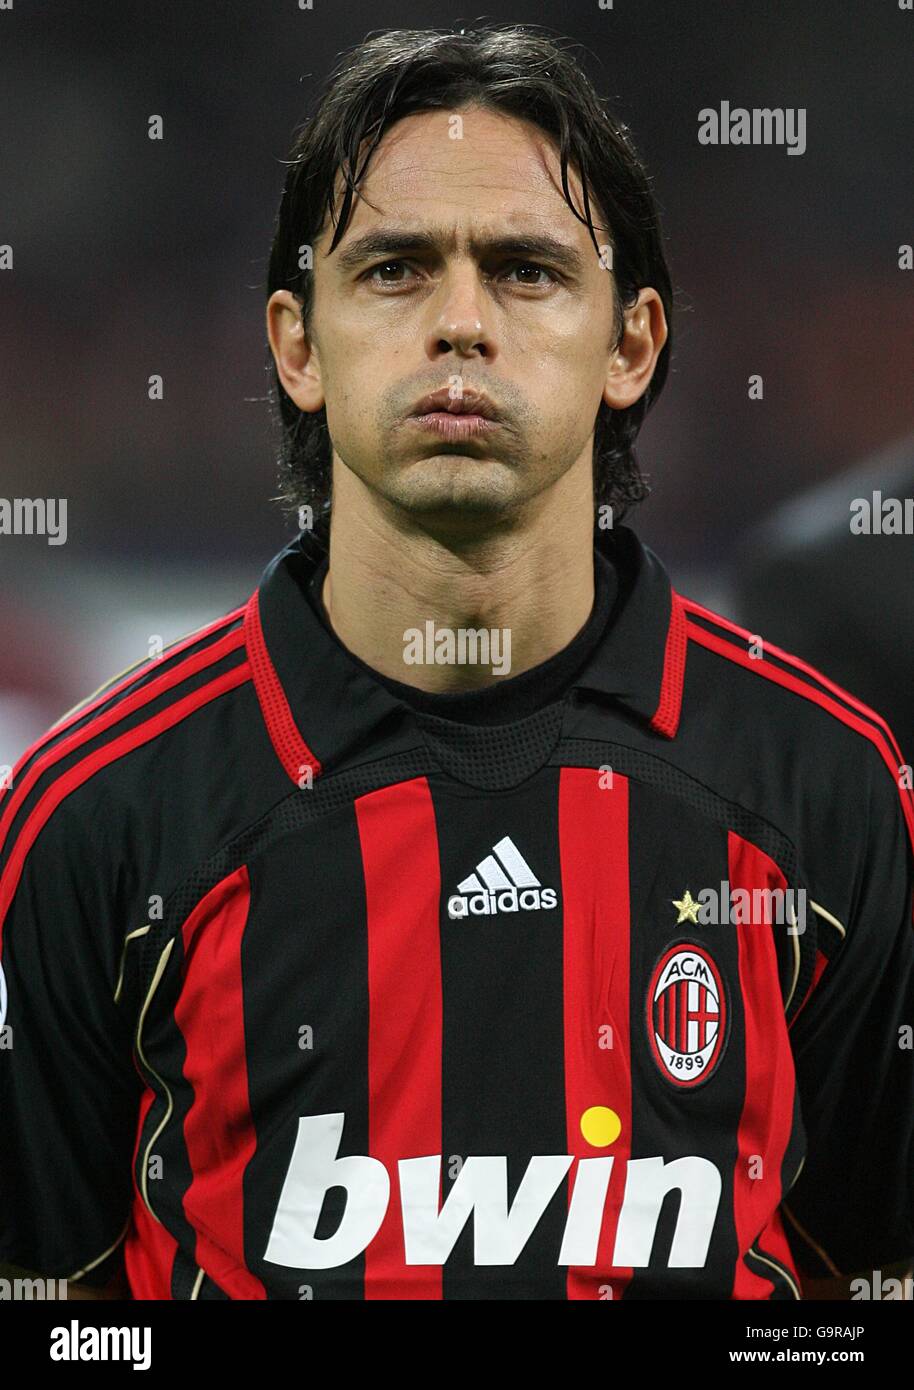 Soccer - UEFA Champions League - First Knockout Round - Second Leg - AC Milan v Celtic - Giuseppe Meazza. Filippo Inzaghi, AC Milan Stock Photo